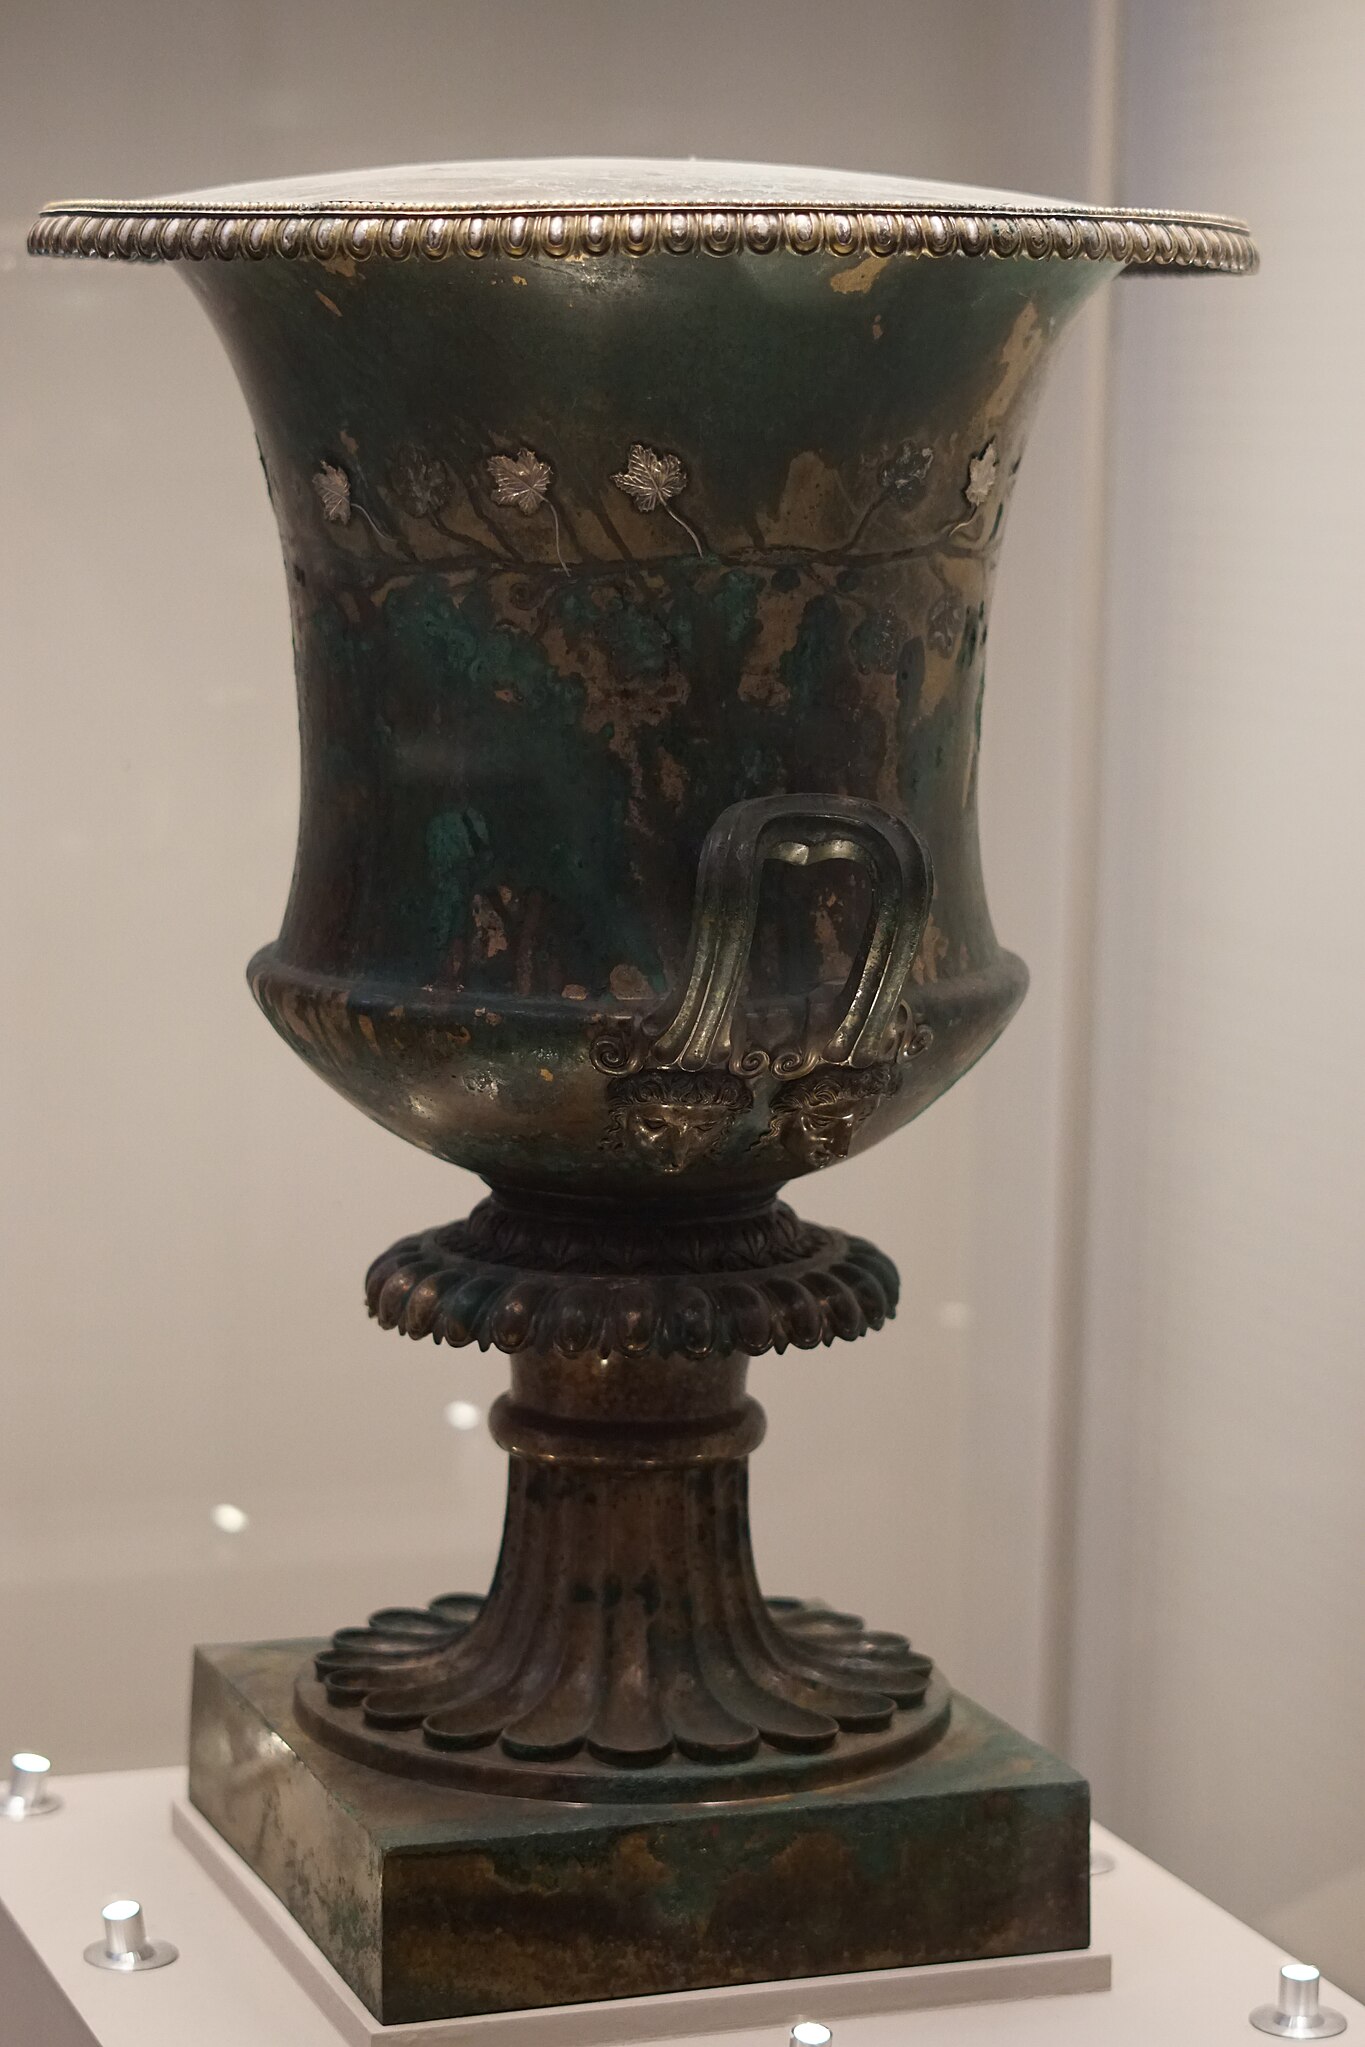 File:Bronze calyx krater (4th B.C.) at National Archaeological Museum of Athens on September 2018.jpg - Wikimedia Commons